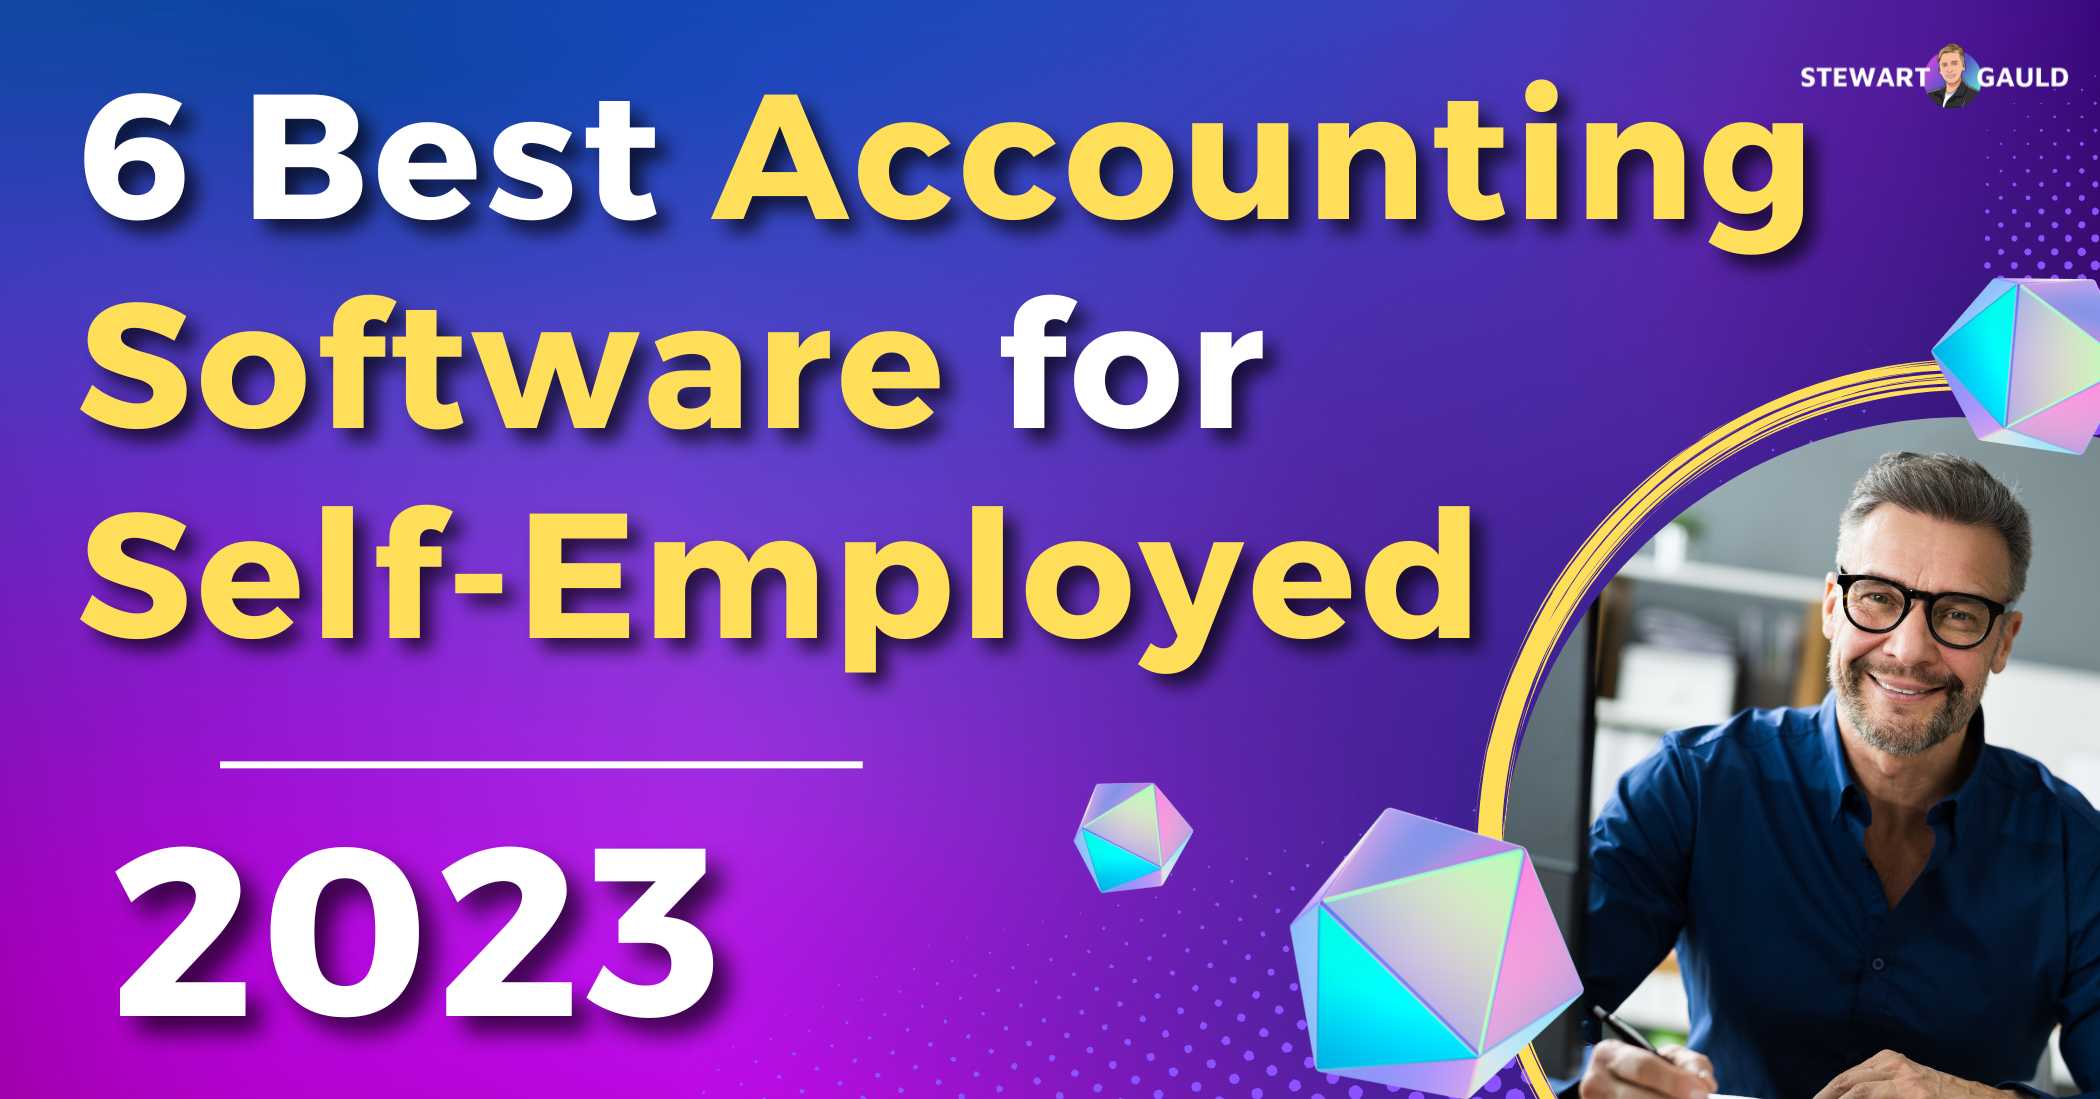 6 Best Accounting Software for Self Employed (My Top Picks) 2023